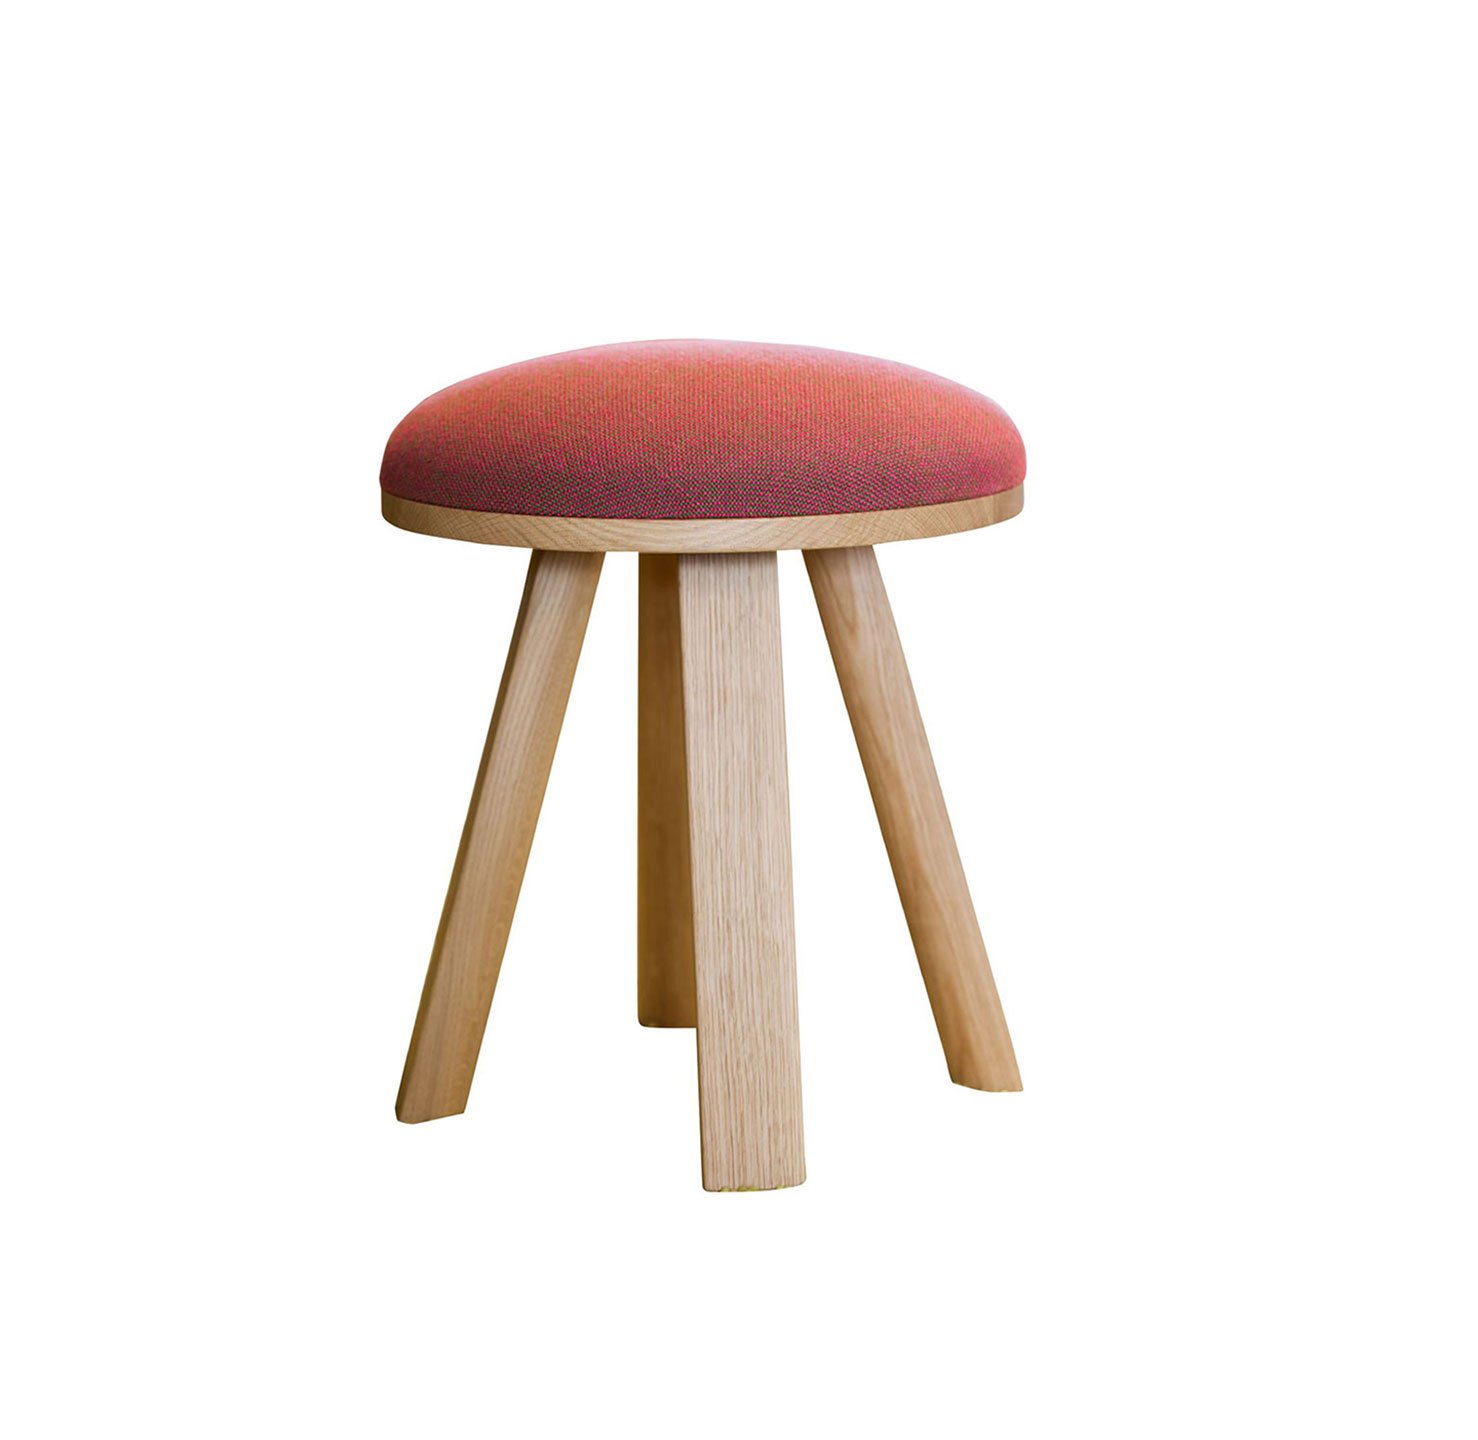 Haworth Buzzimilk stool in red and wood color